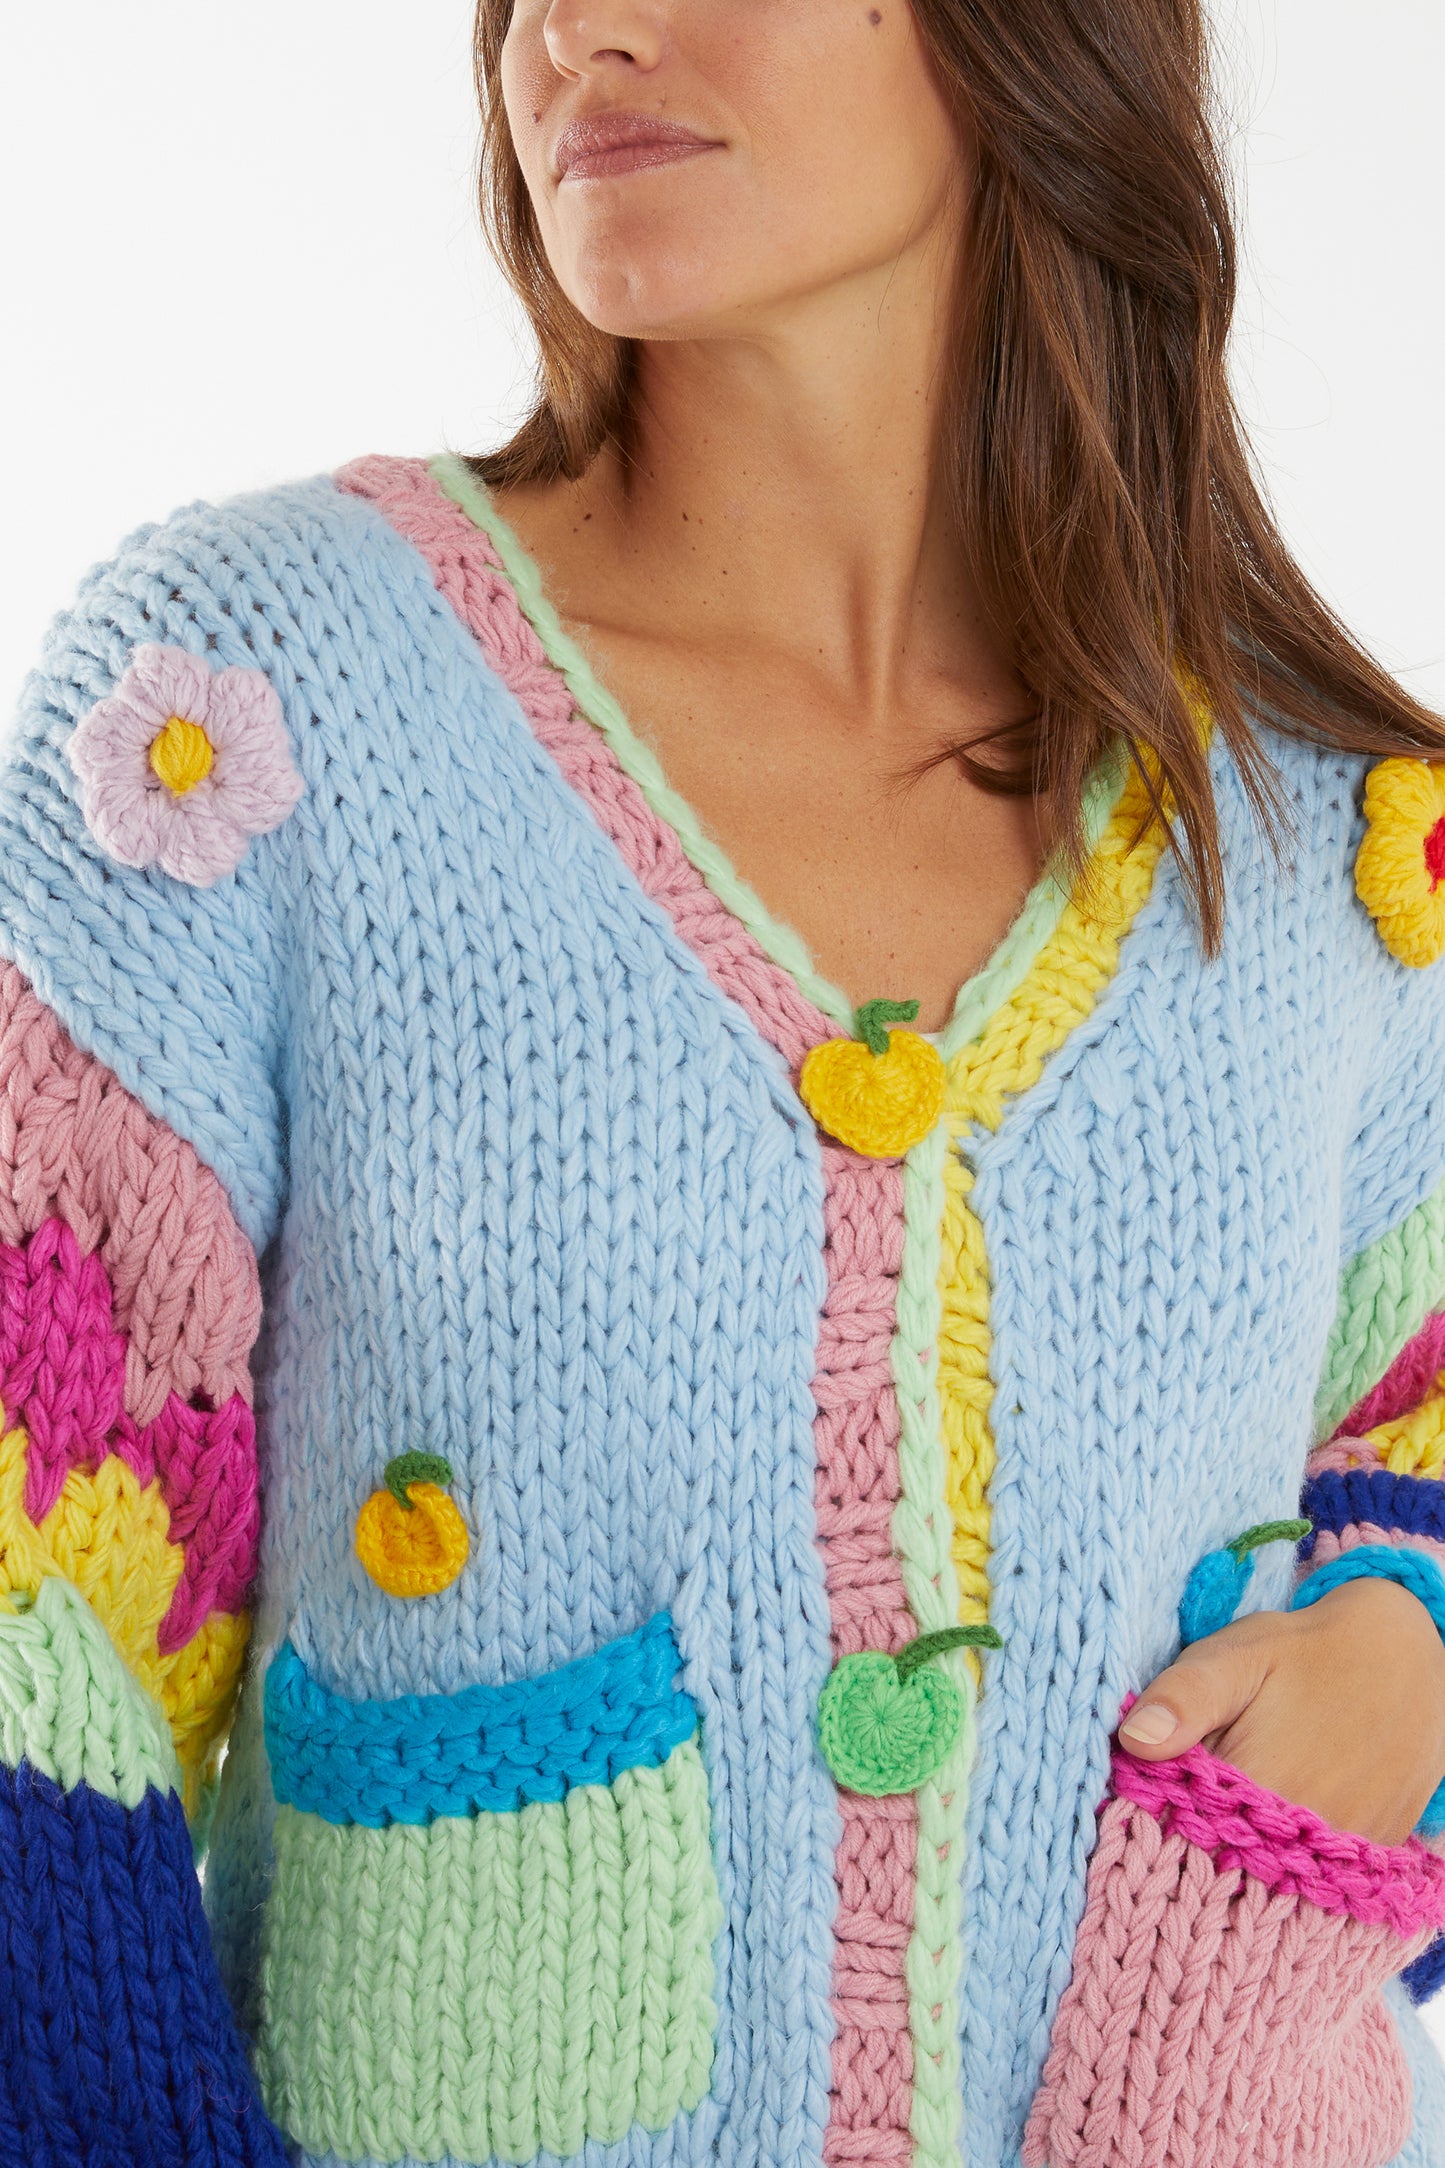 The Edit - Hand Knit Chunky Cardigan with Flower Applique